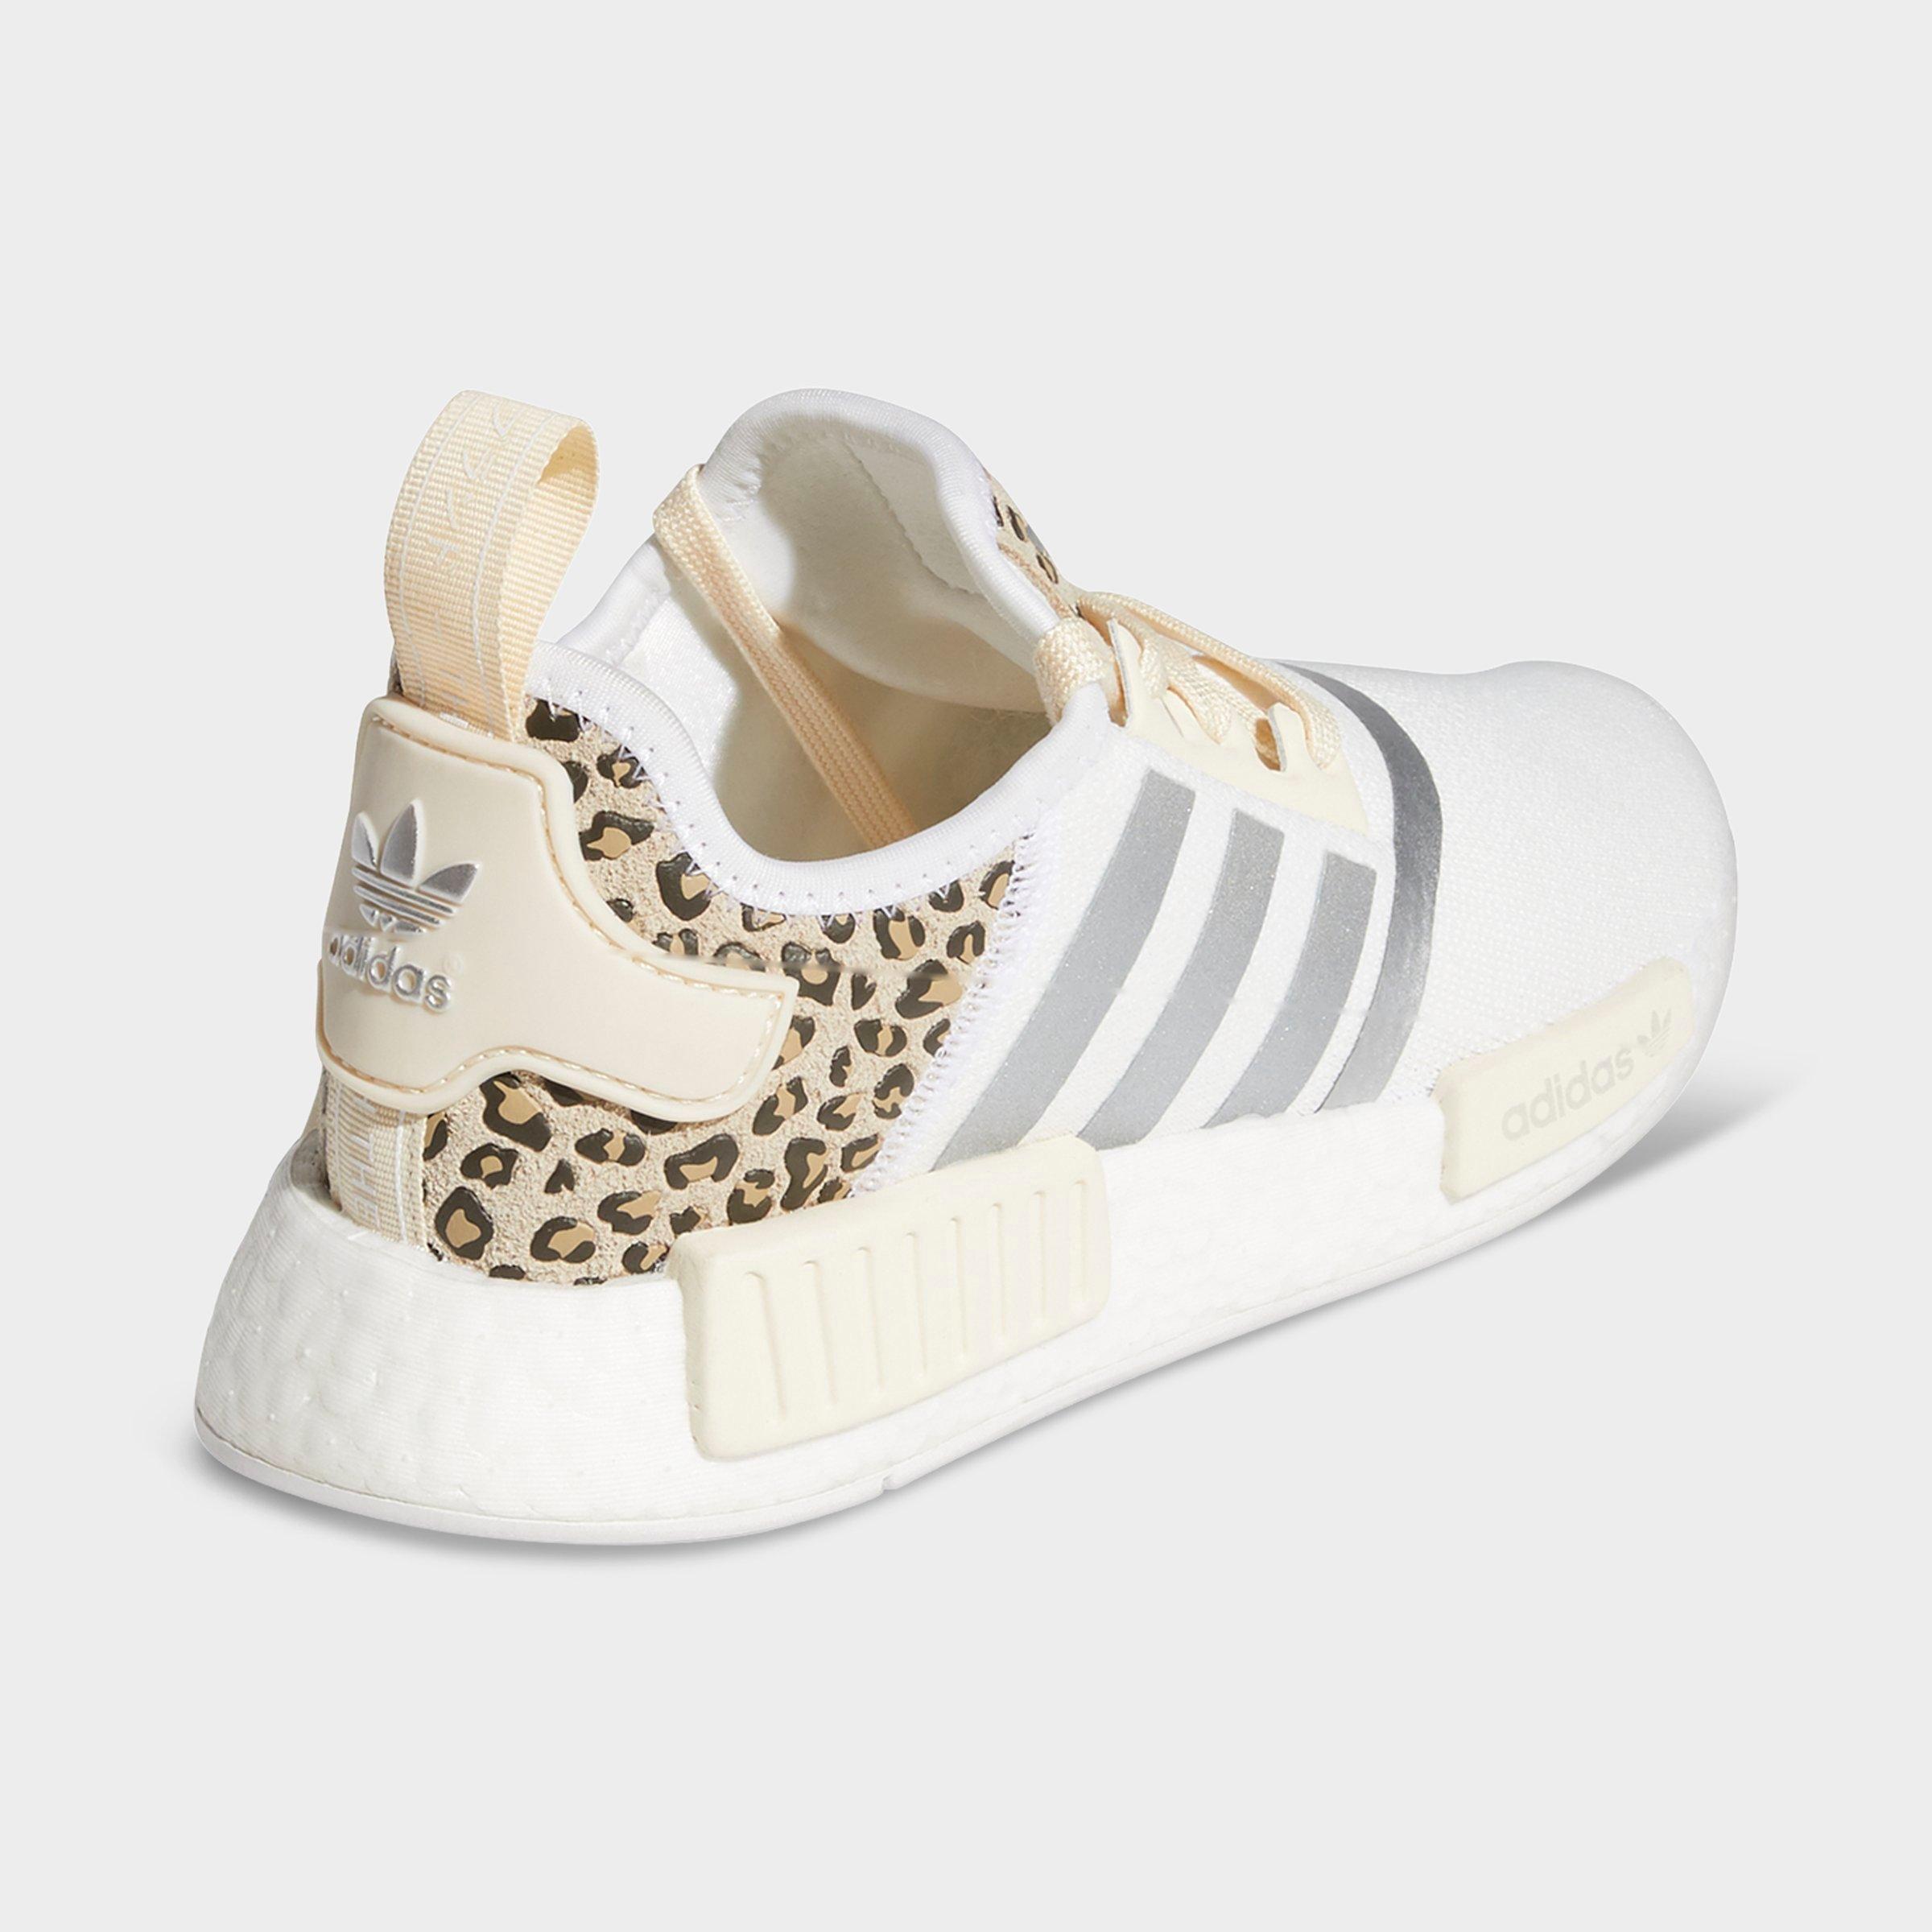 adidas leopard trainers womens